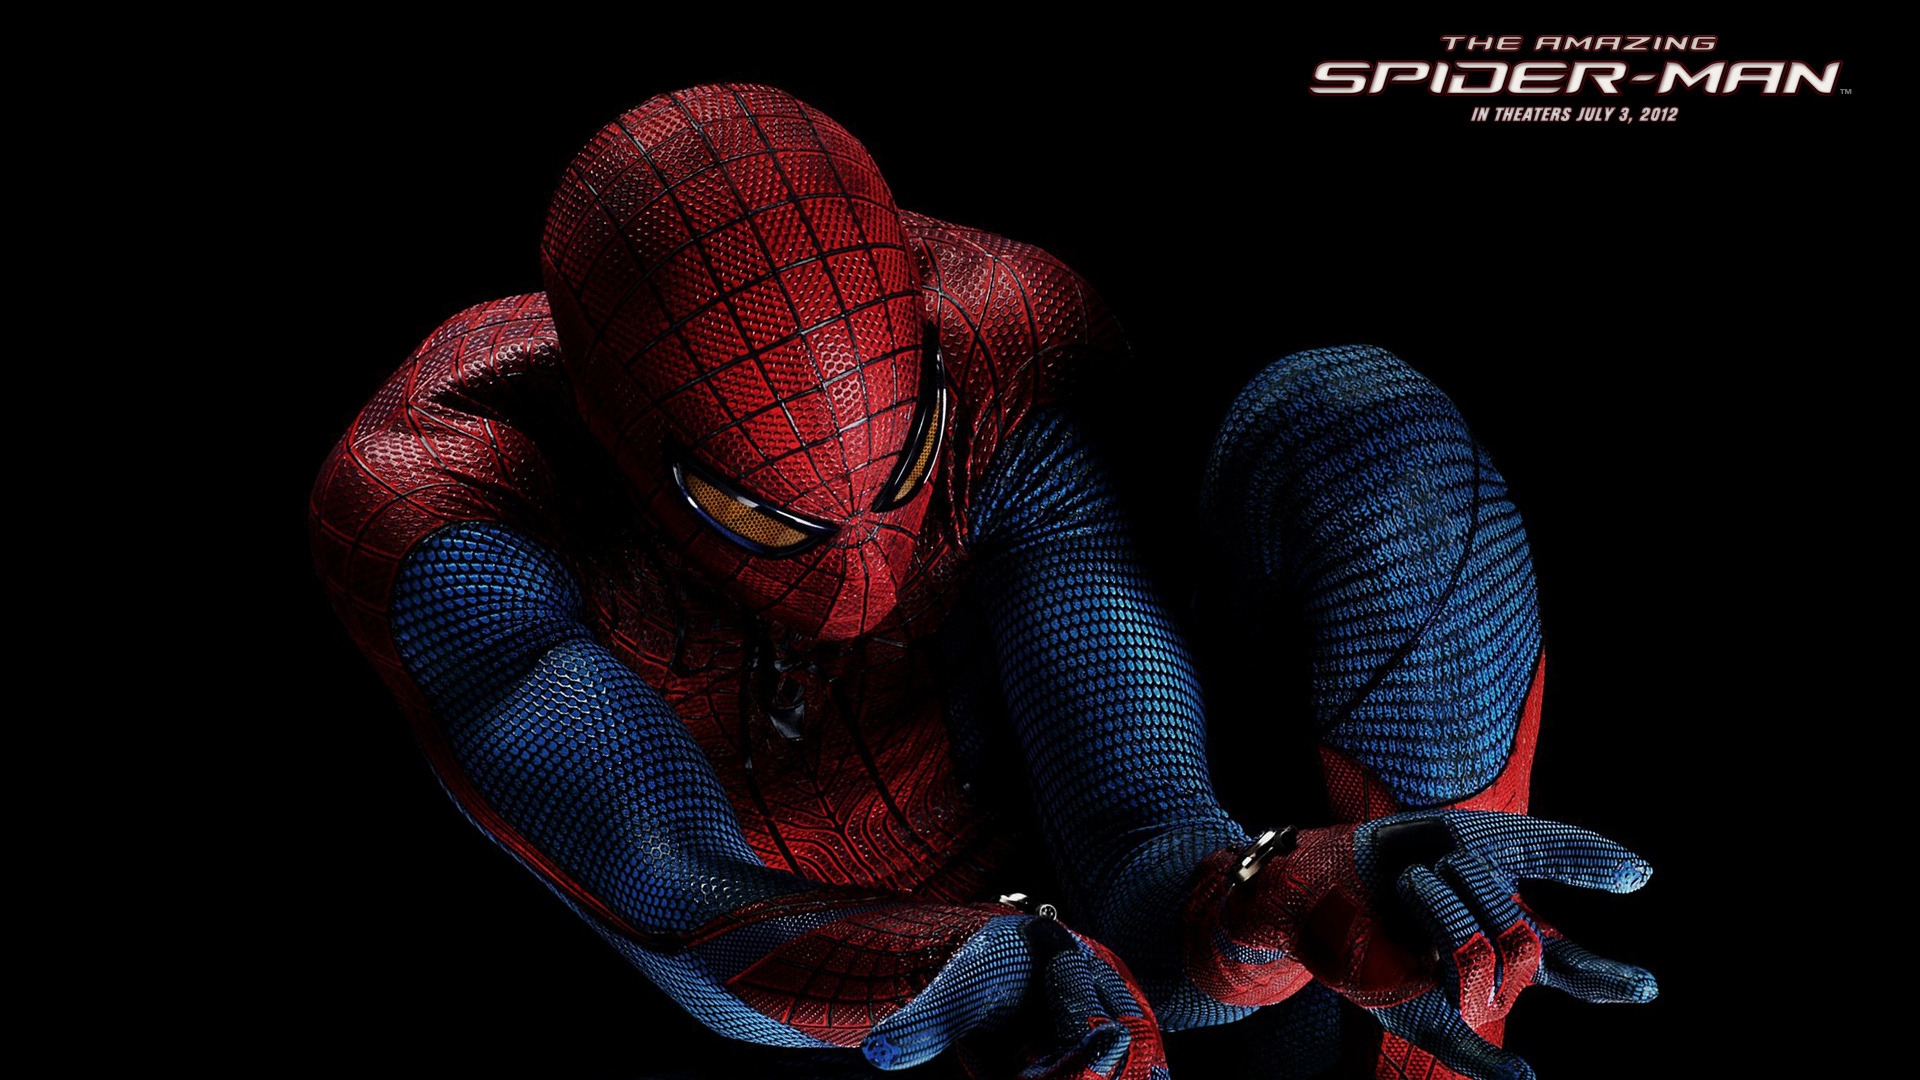 The Amazing Spider Man for 1920 x 1080 HDTV 1080p resolution